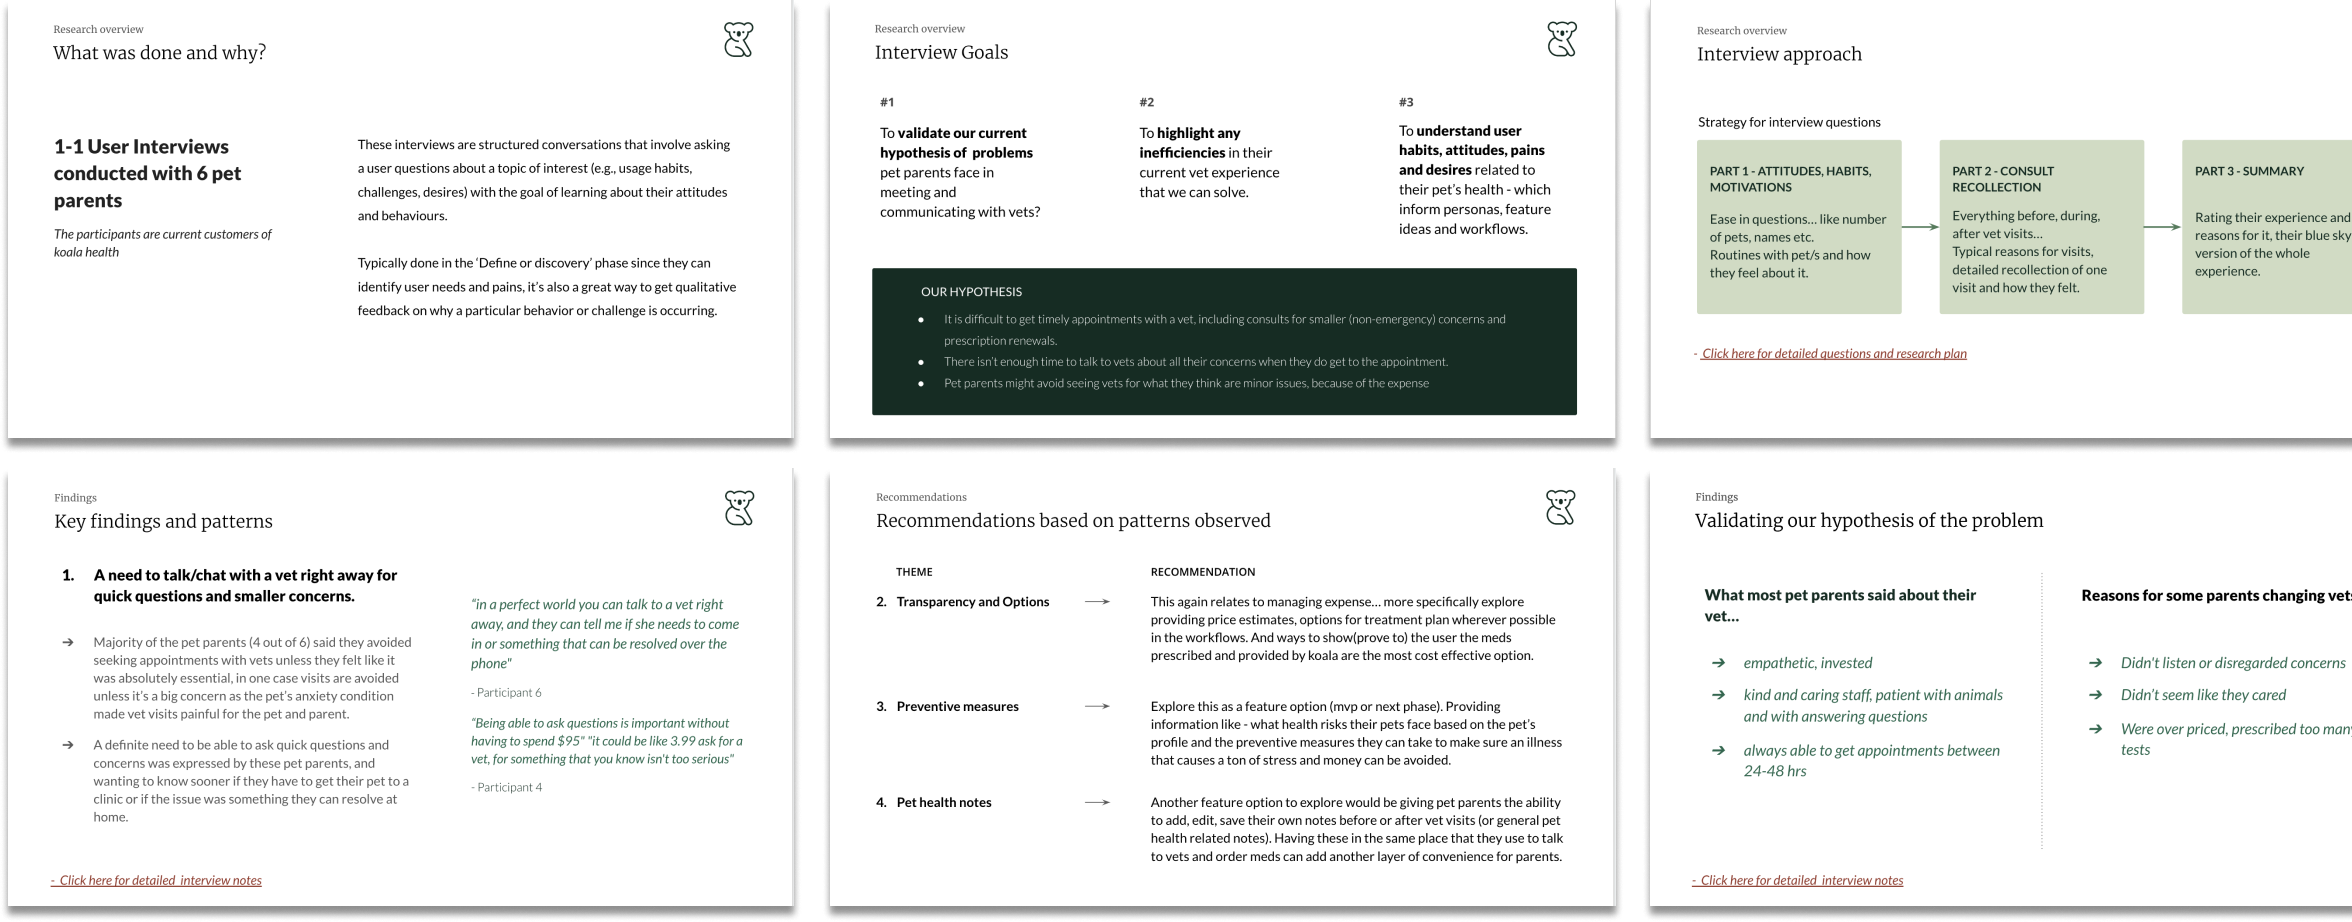 Screenshots of documents describing the results of Echobind's customer interviews conducted for Koala Health.